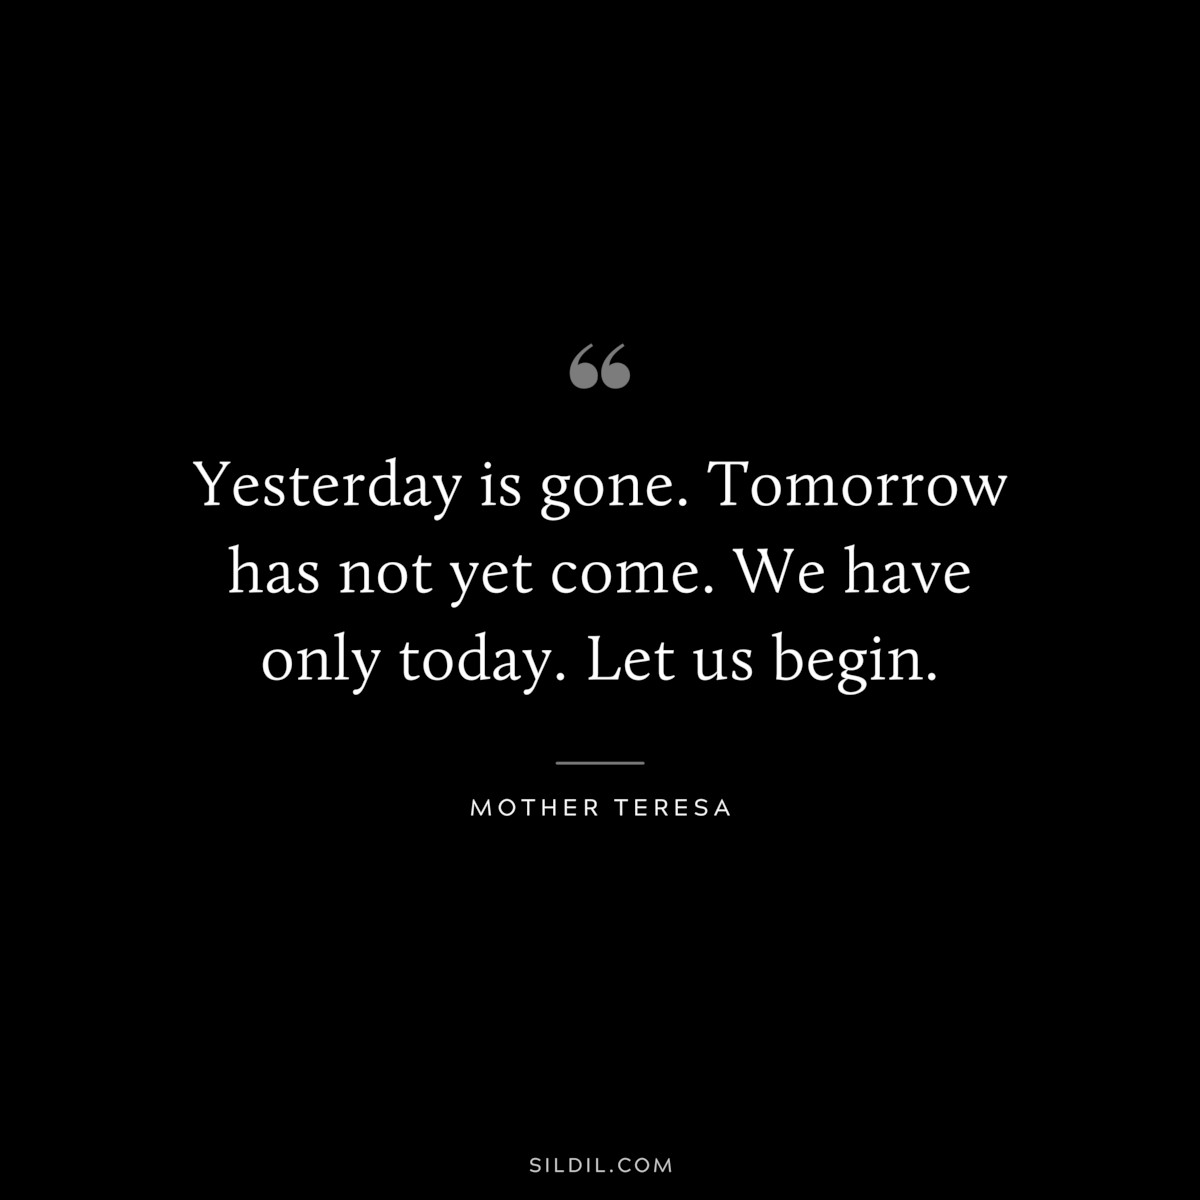 Yesterday is gone. Tomorrow has not yet come. We have only today. Let us begin. ― Mother Teresa